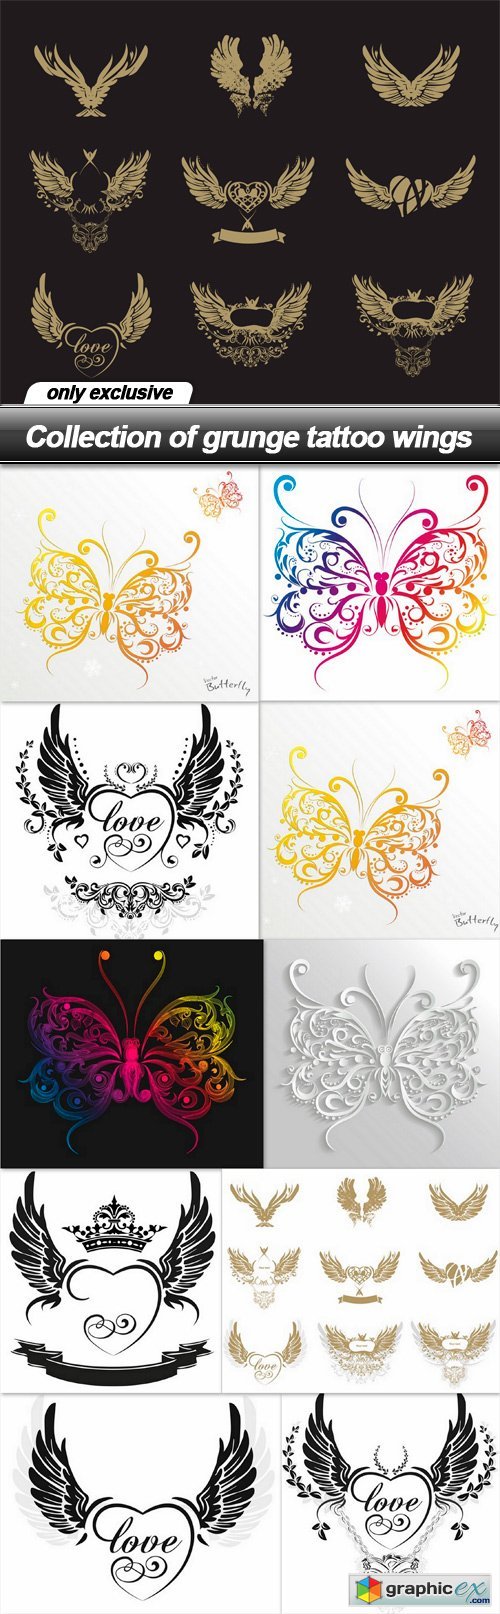 Collection of grunge tattoo wings - 11 EPS